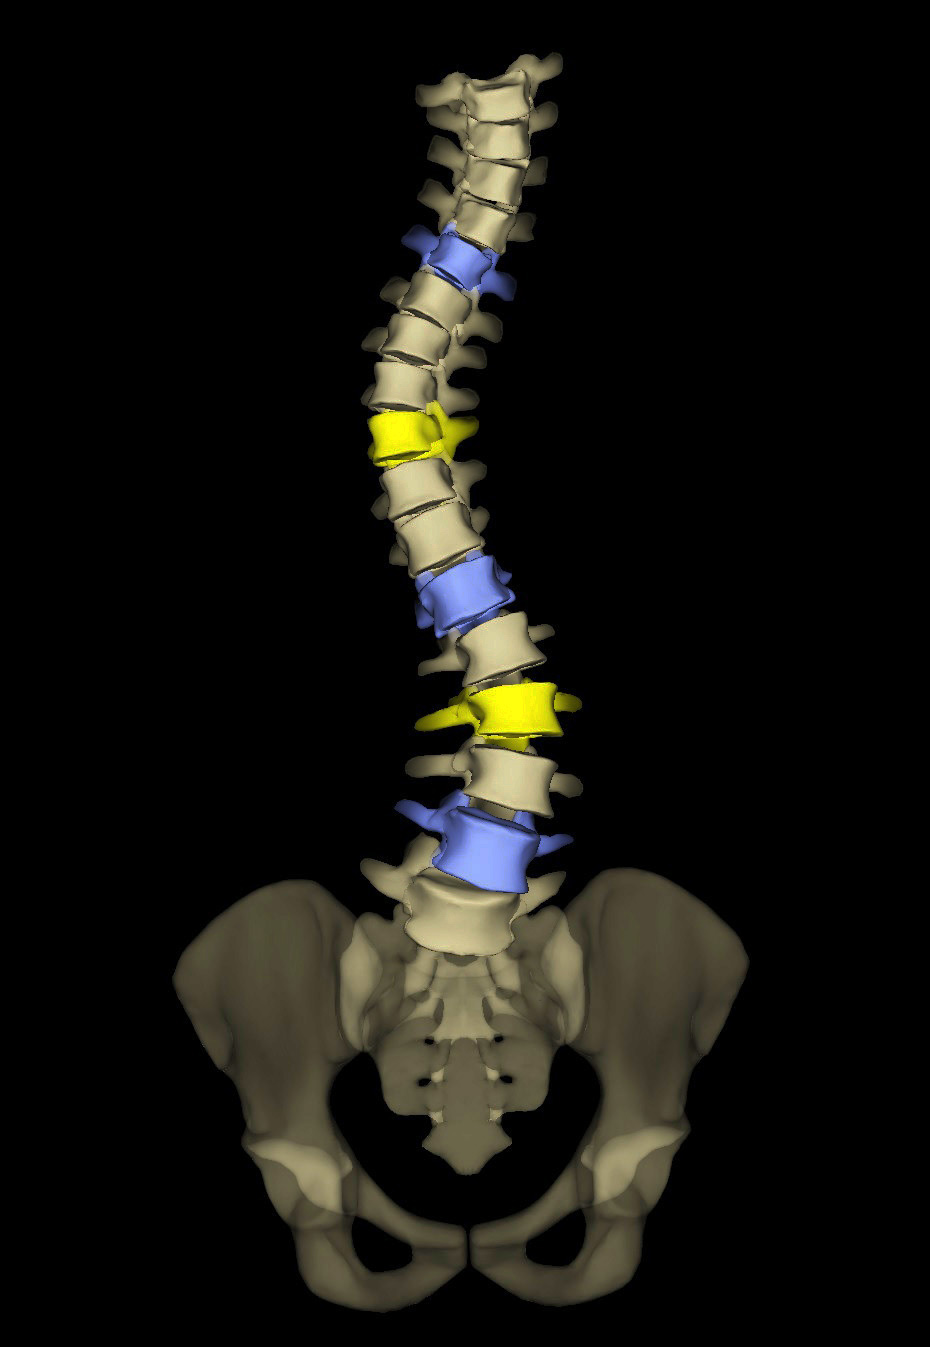 Scoliosis and Imaging